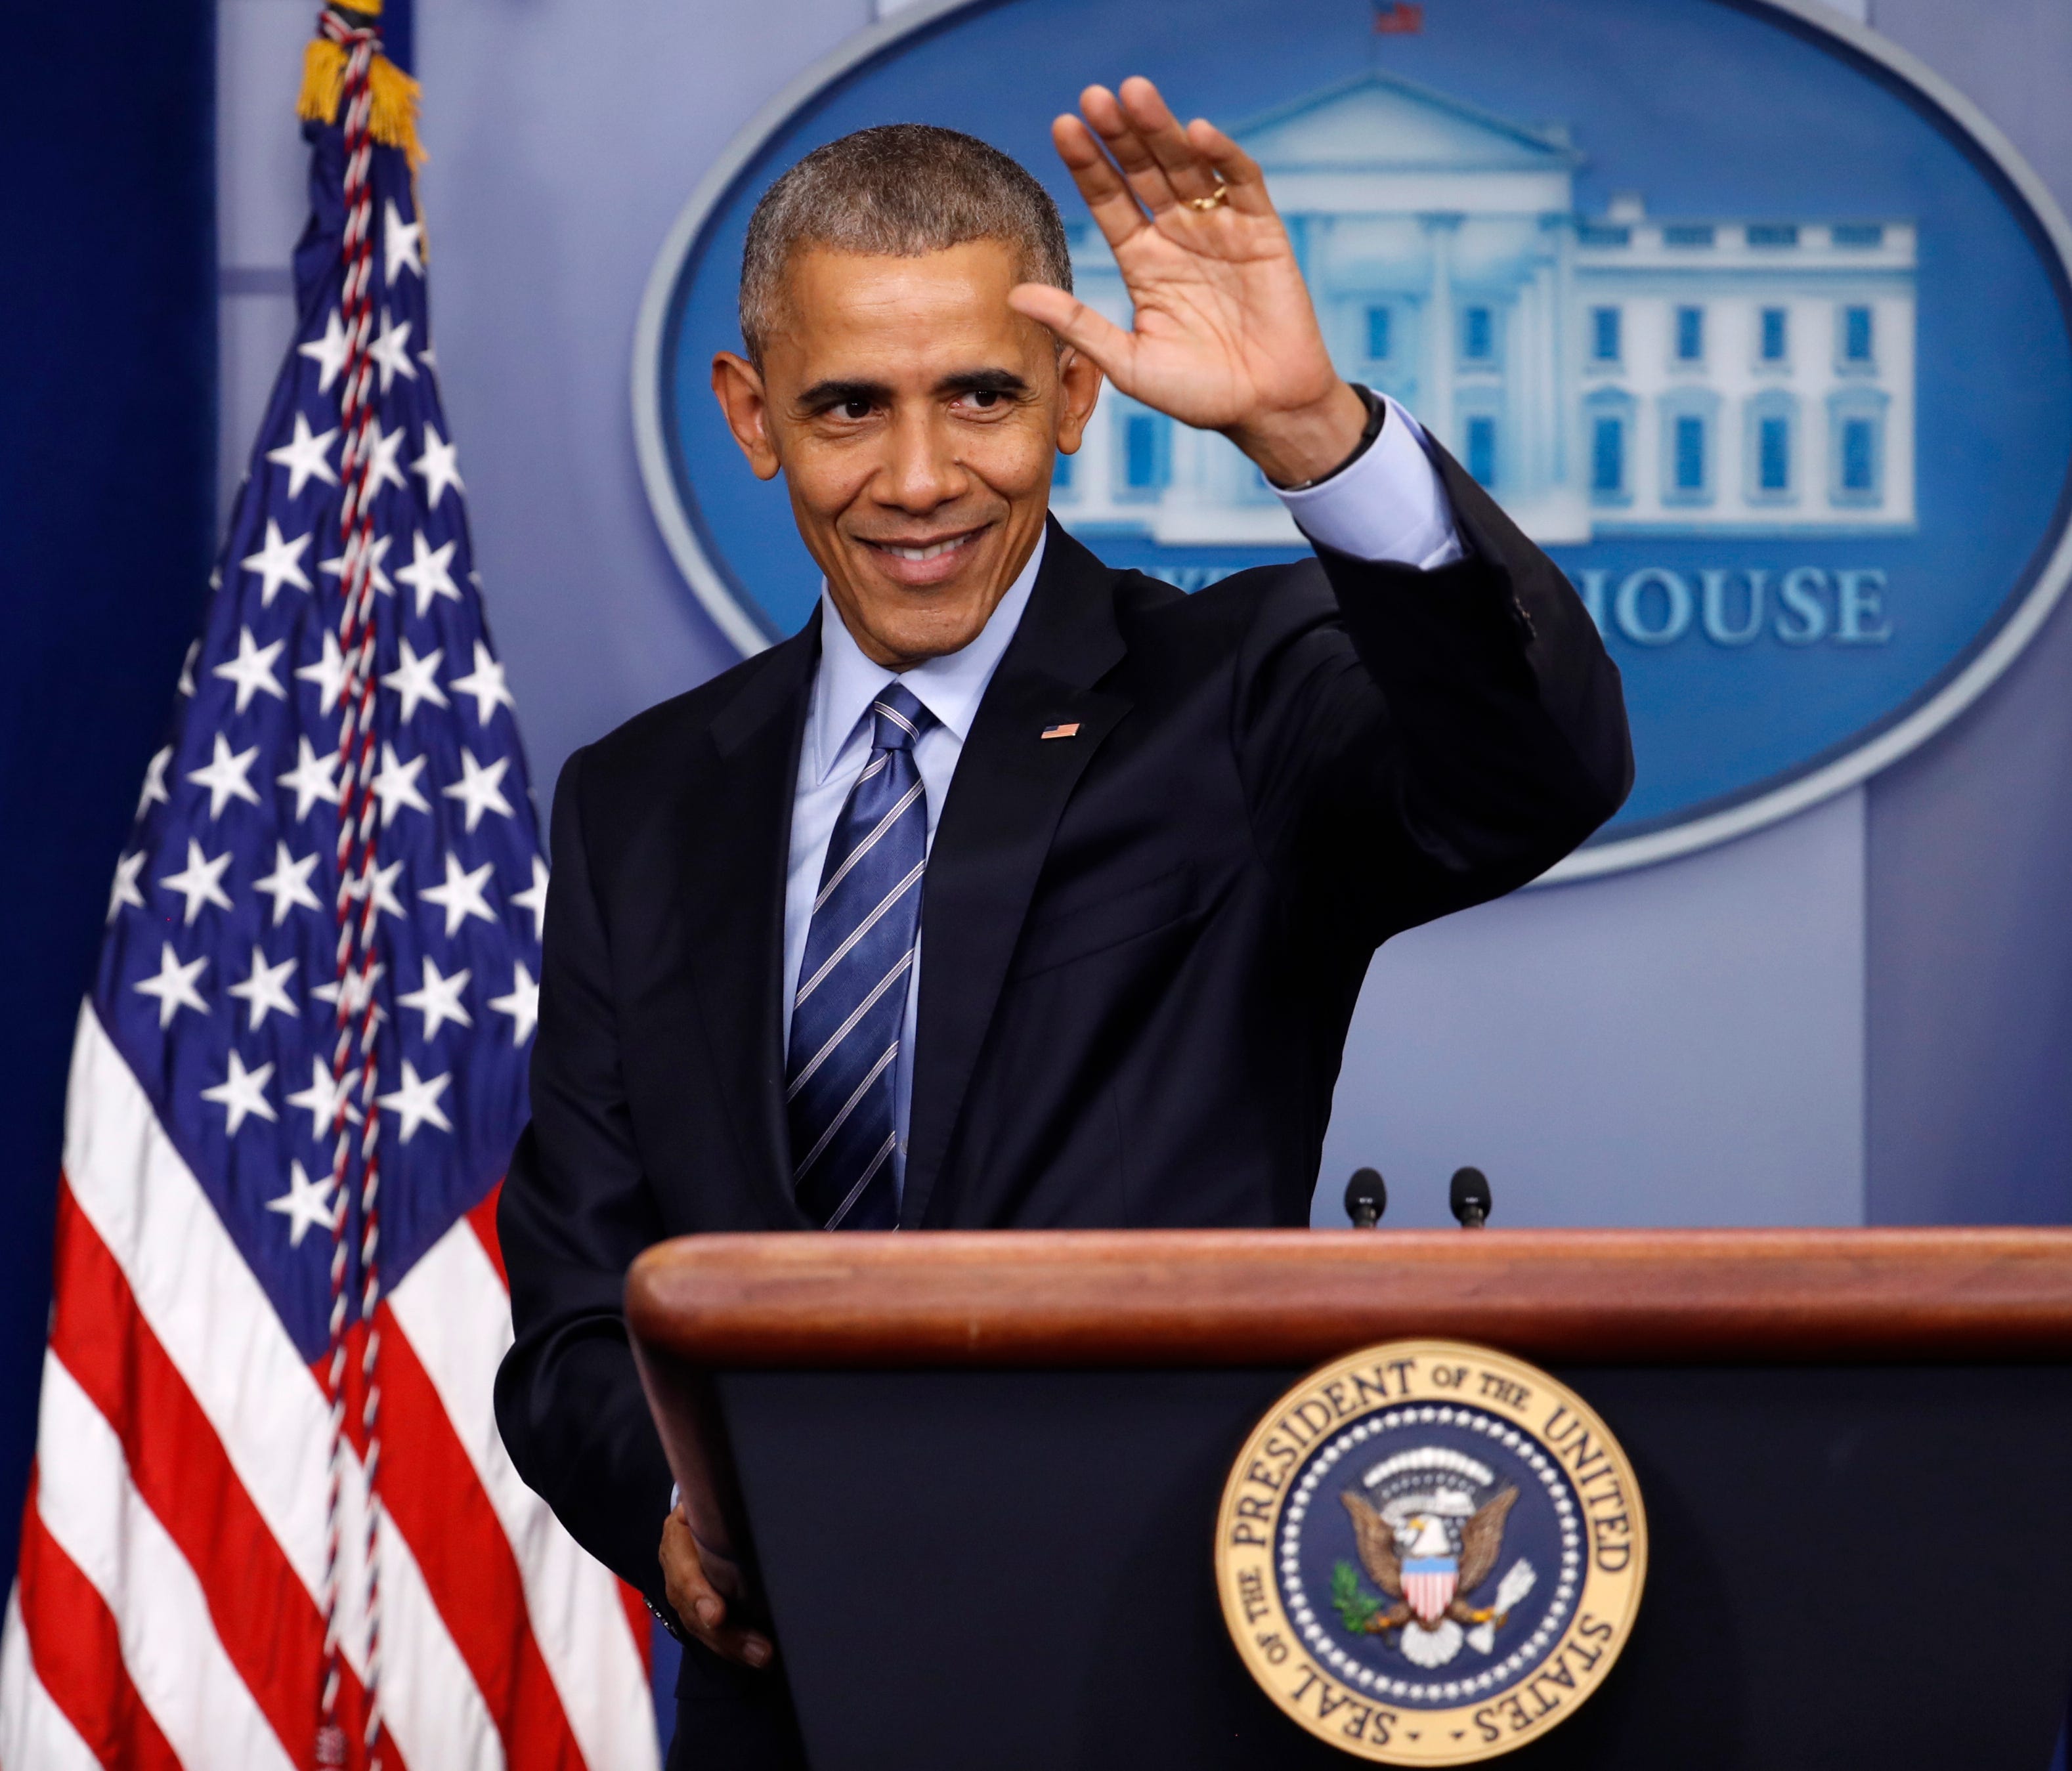 President Barack Obama waves at the conclusion of his news conference in the briefing room of the White House in Washington, Dec. 16, 2016.